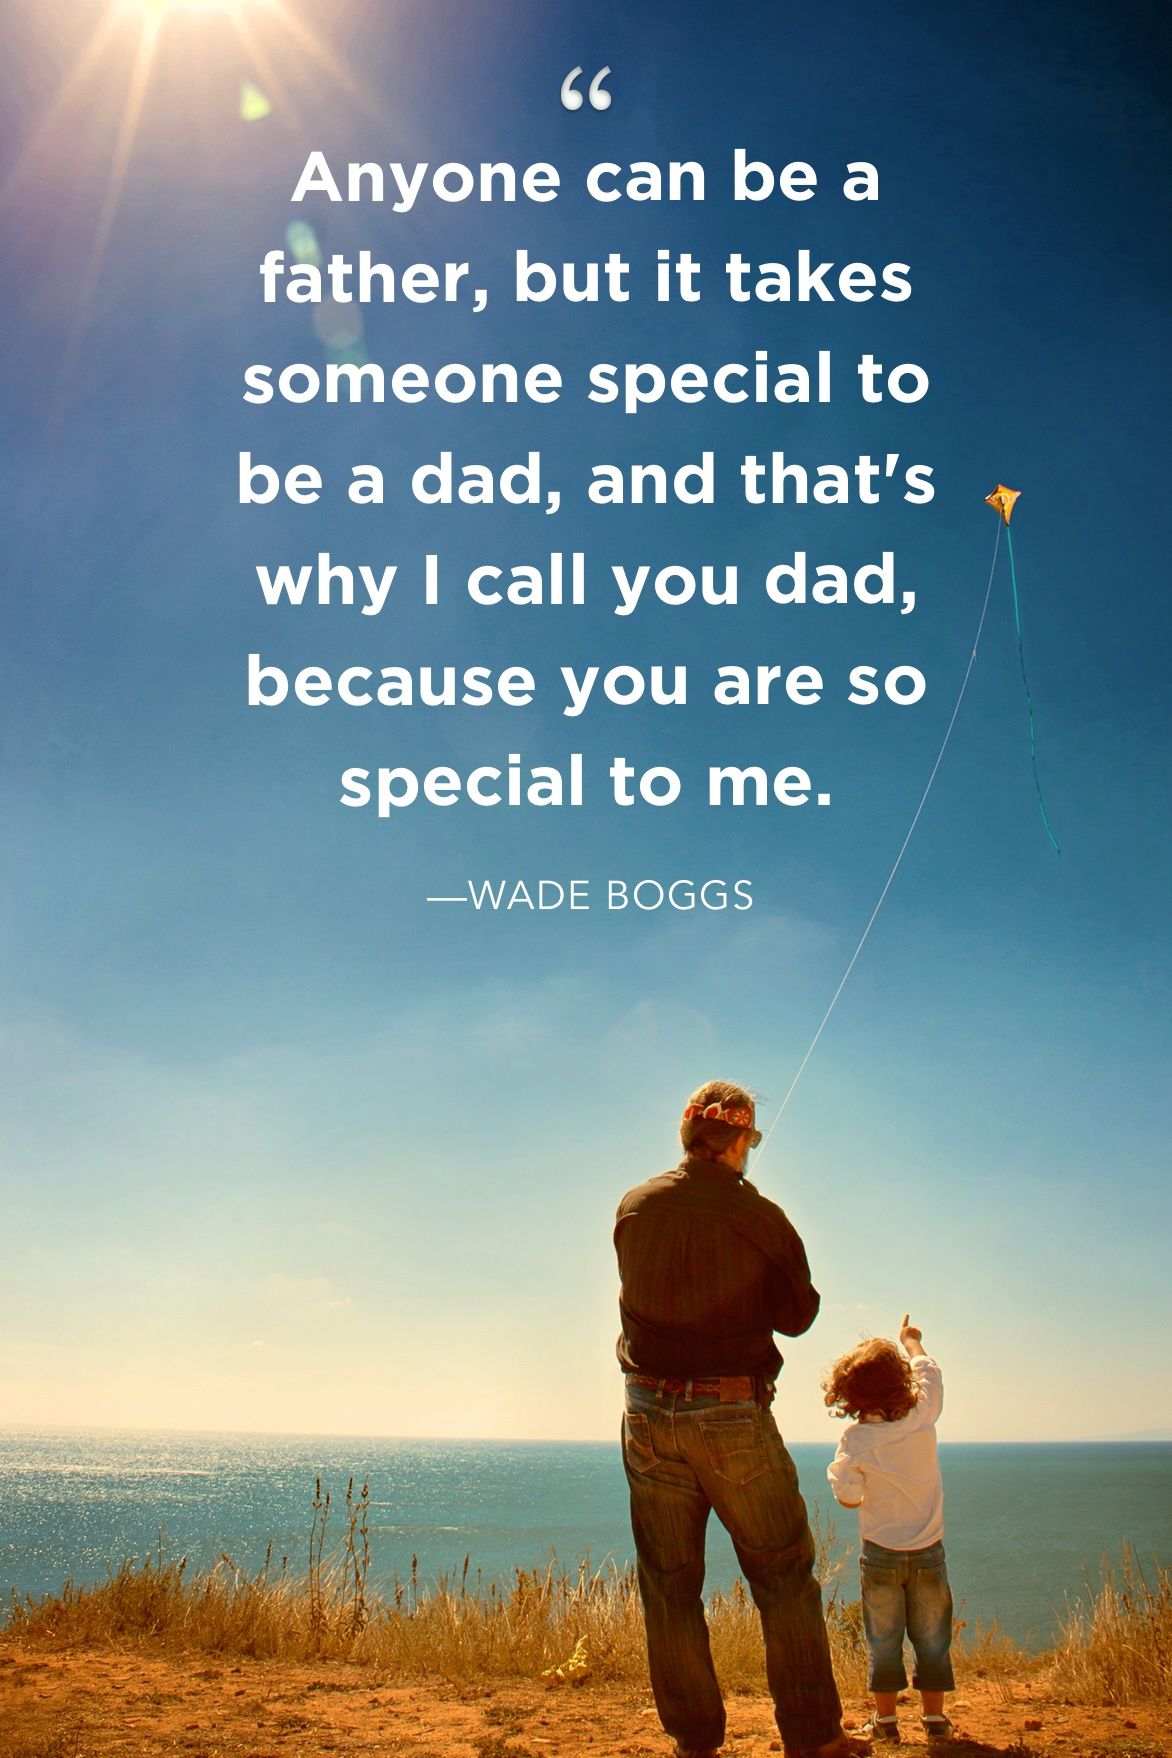 anyone can be a father, but it takes someone special to be a dad, and thats’ why i call you dad because you are so special to me. wade boggs